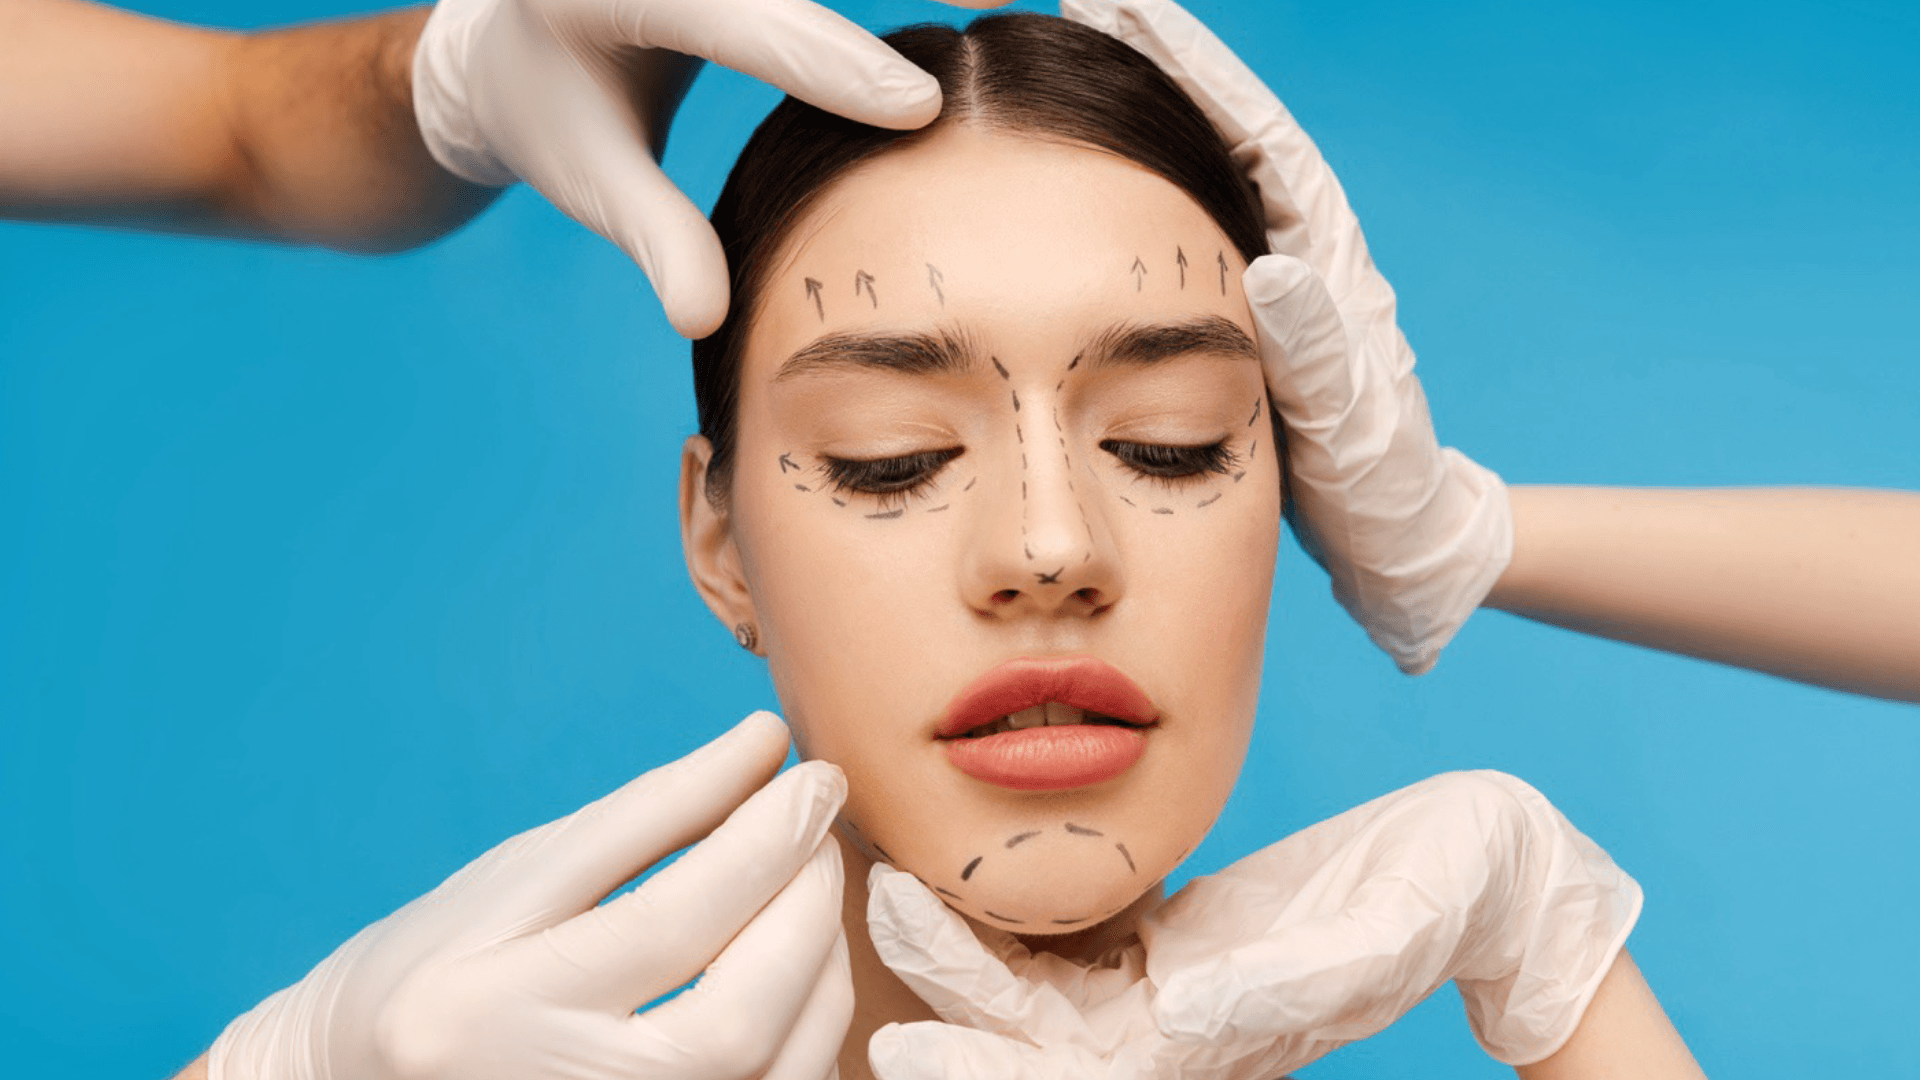 Blog: The Ultimate Guide to Thread Lifts for a V-Shape Face and Youthful Glow